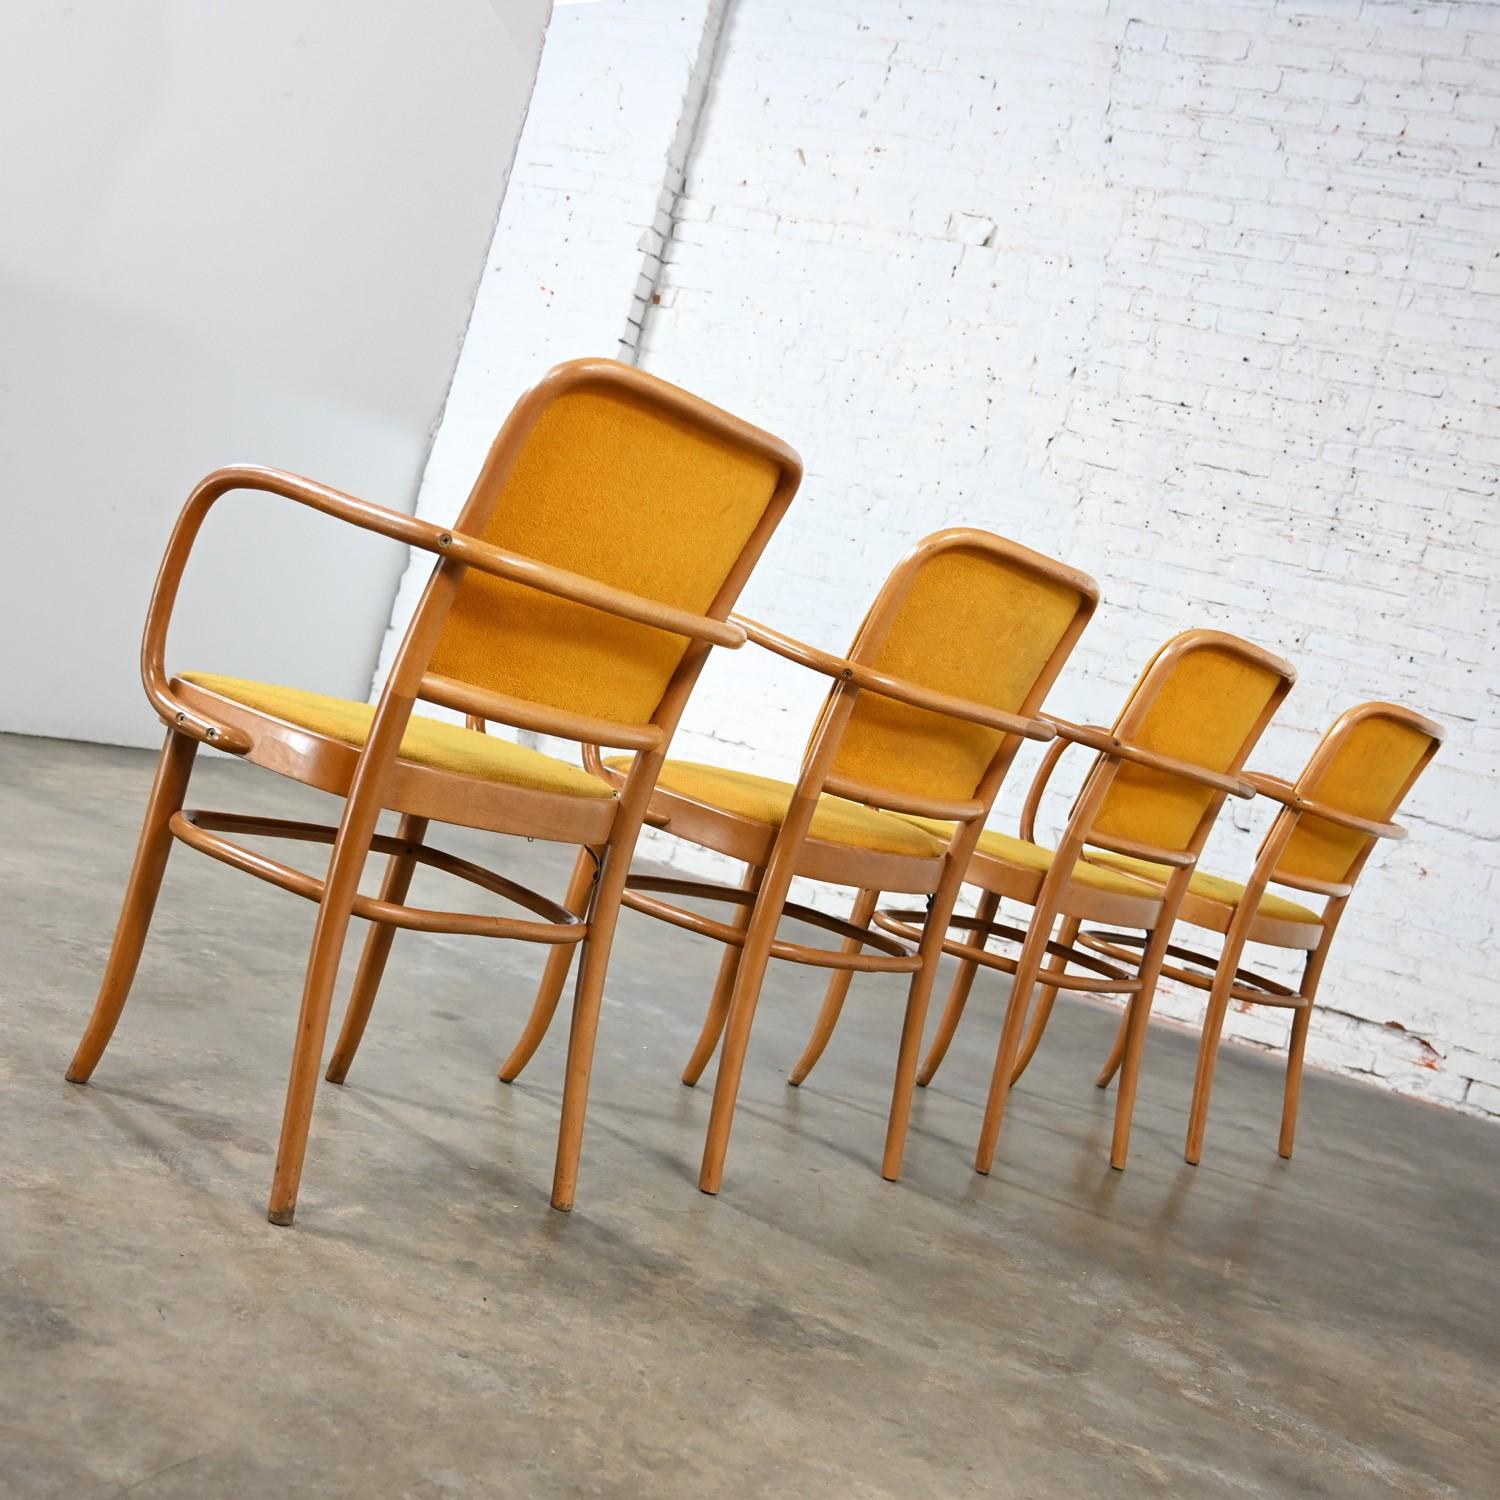 4 Armed Bauhaus Beech Bentwood J Hoffman Prague 811 Dining Chairs Style Thonet In Good Condition For Sale In Topeka, KS